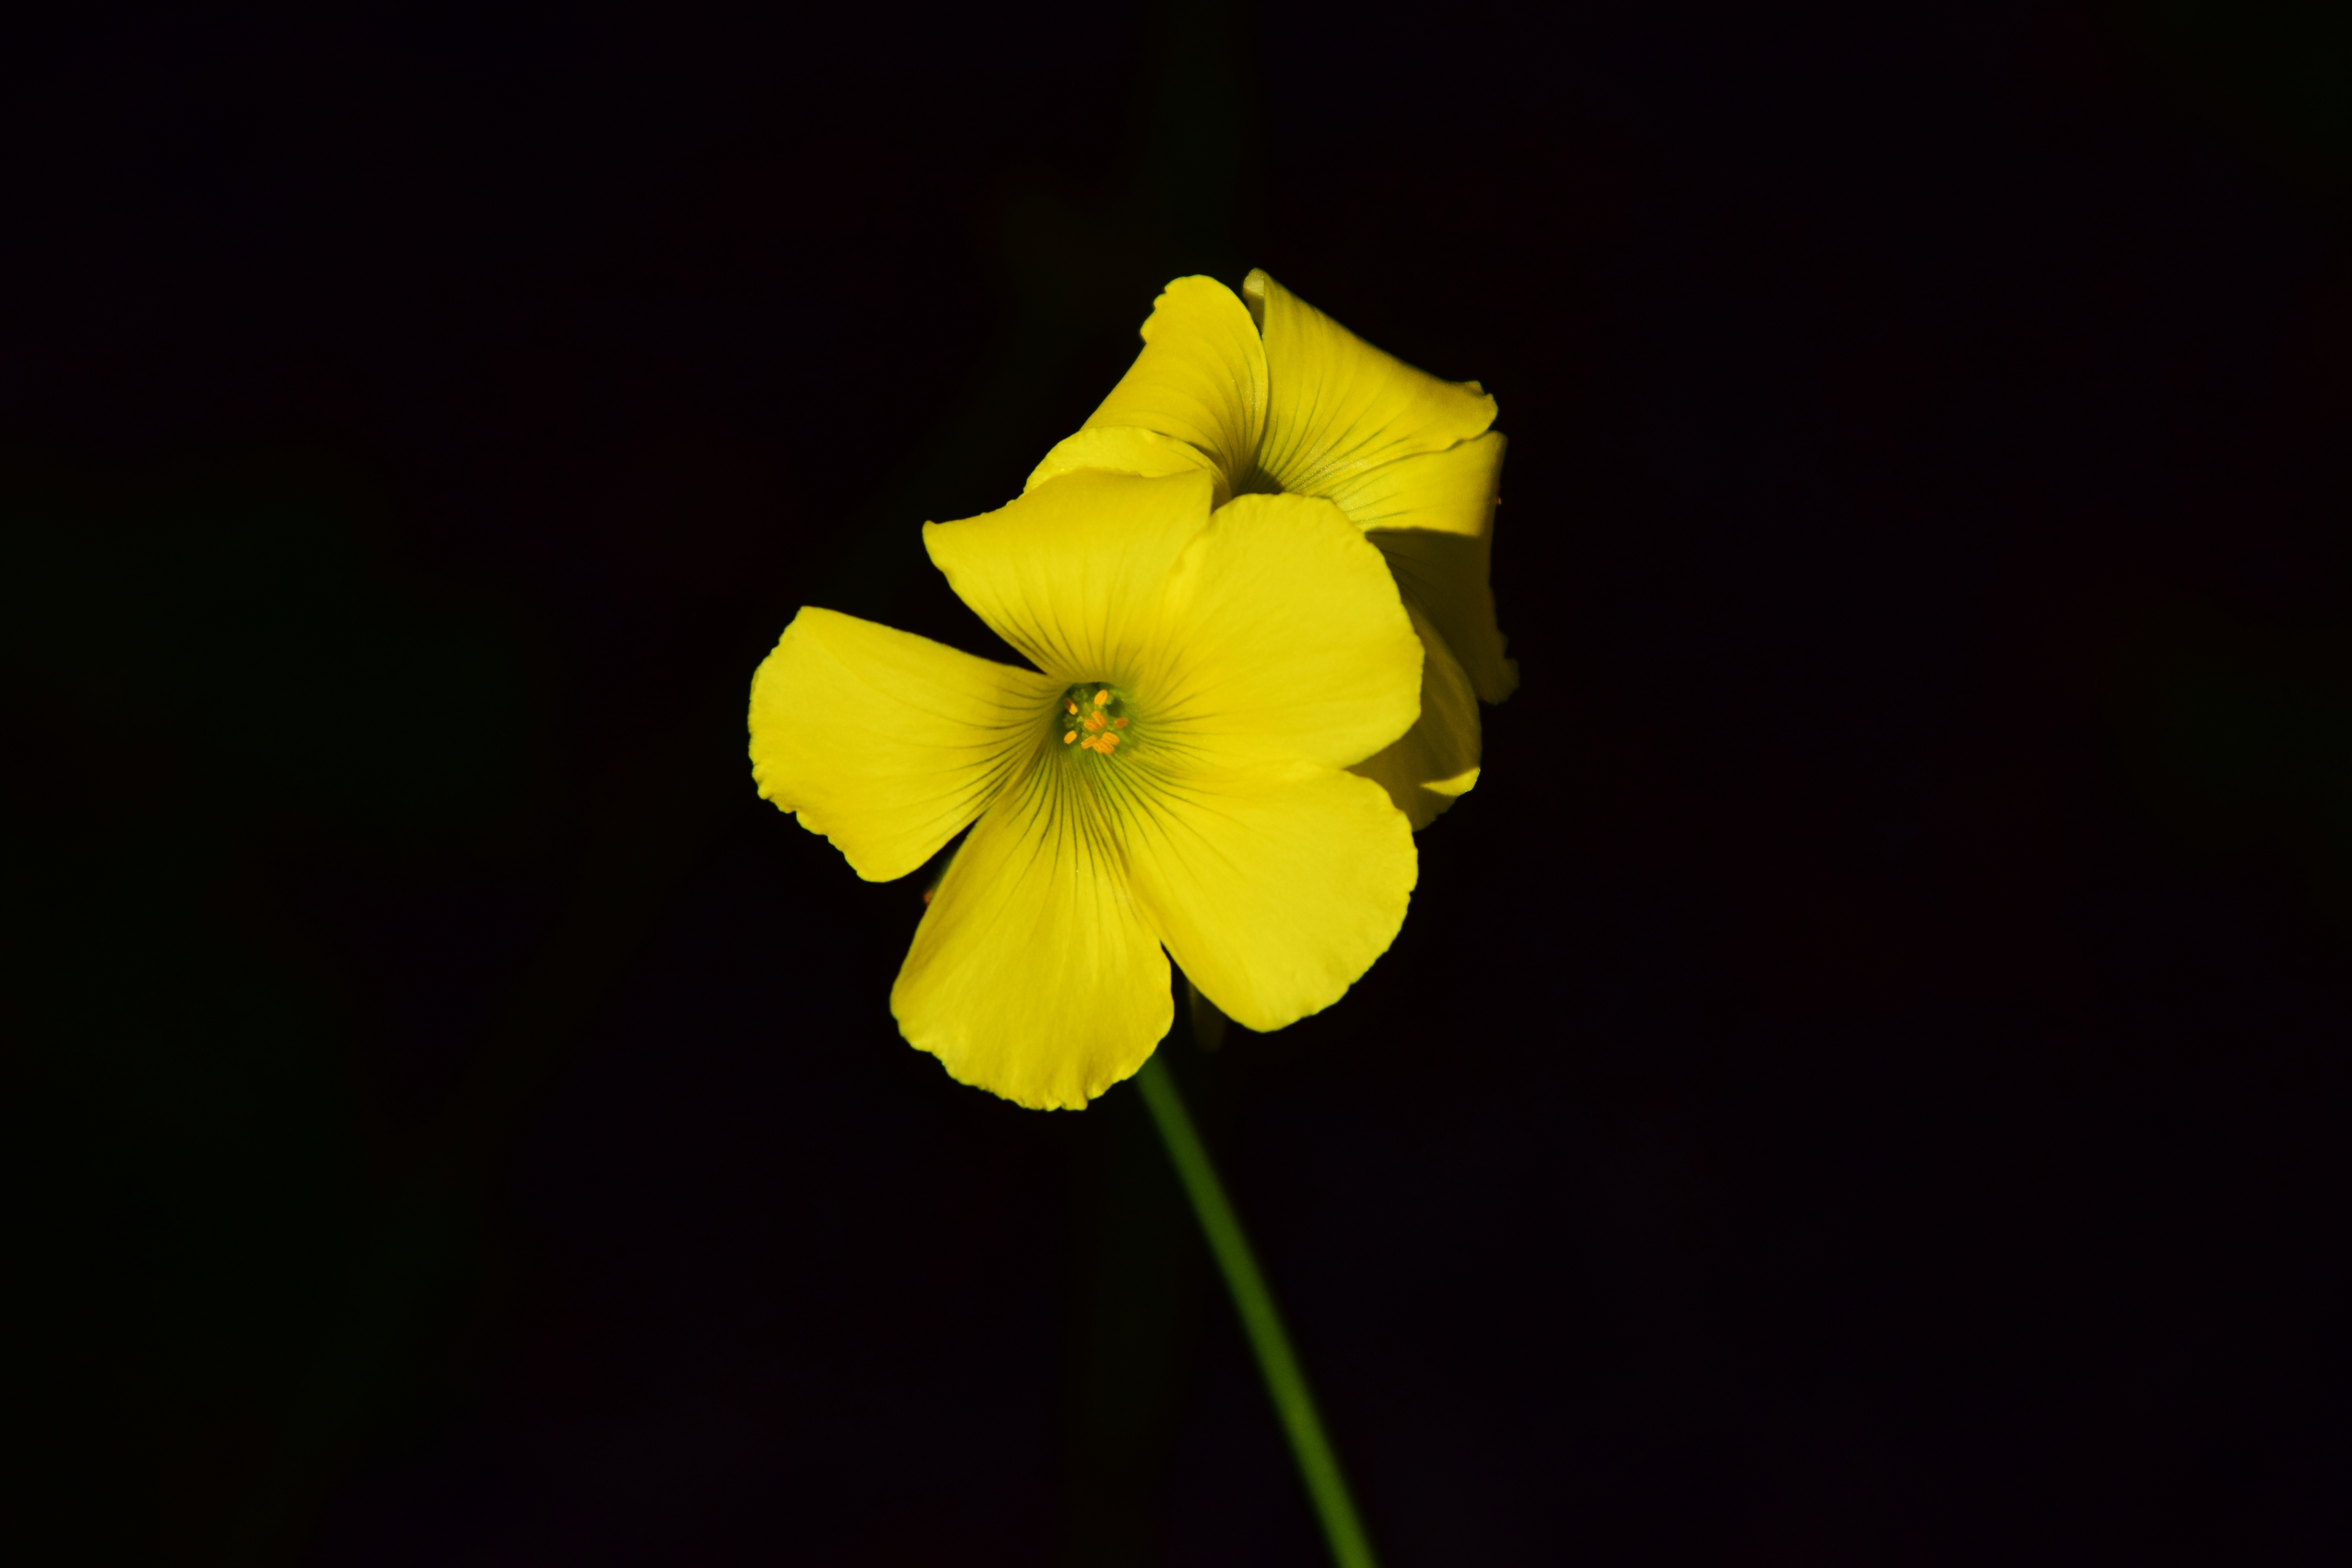 contrast, black background, yellow, flower, macro, close up, small, oxalis